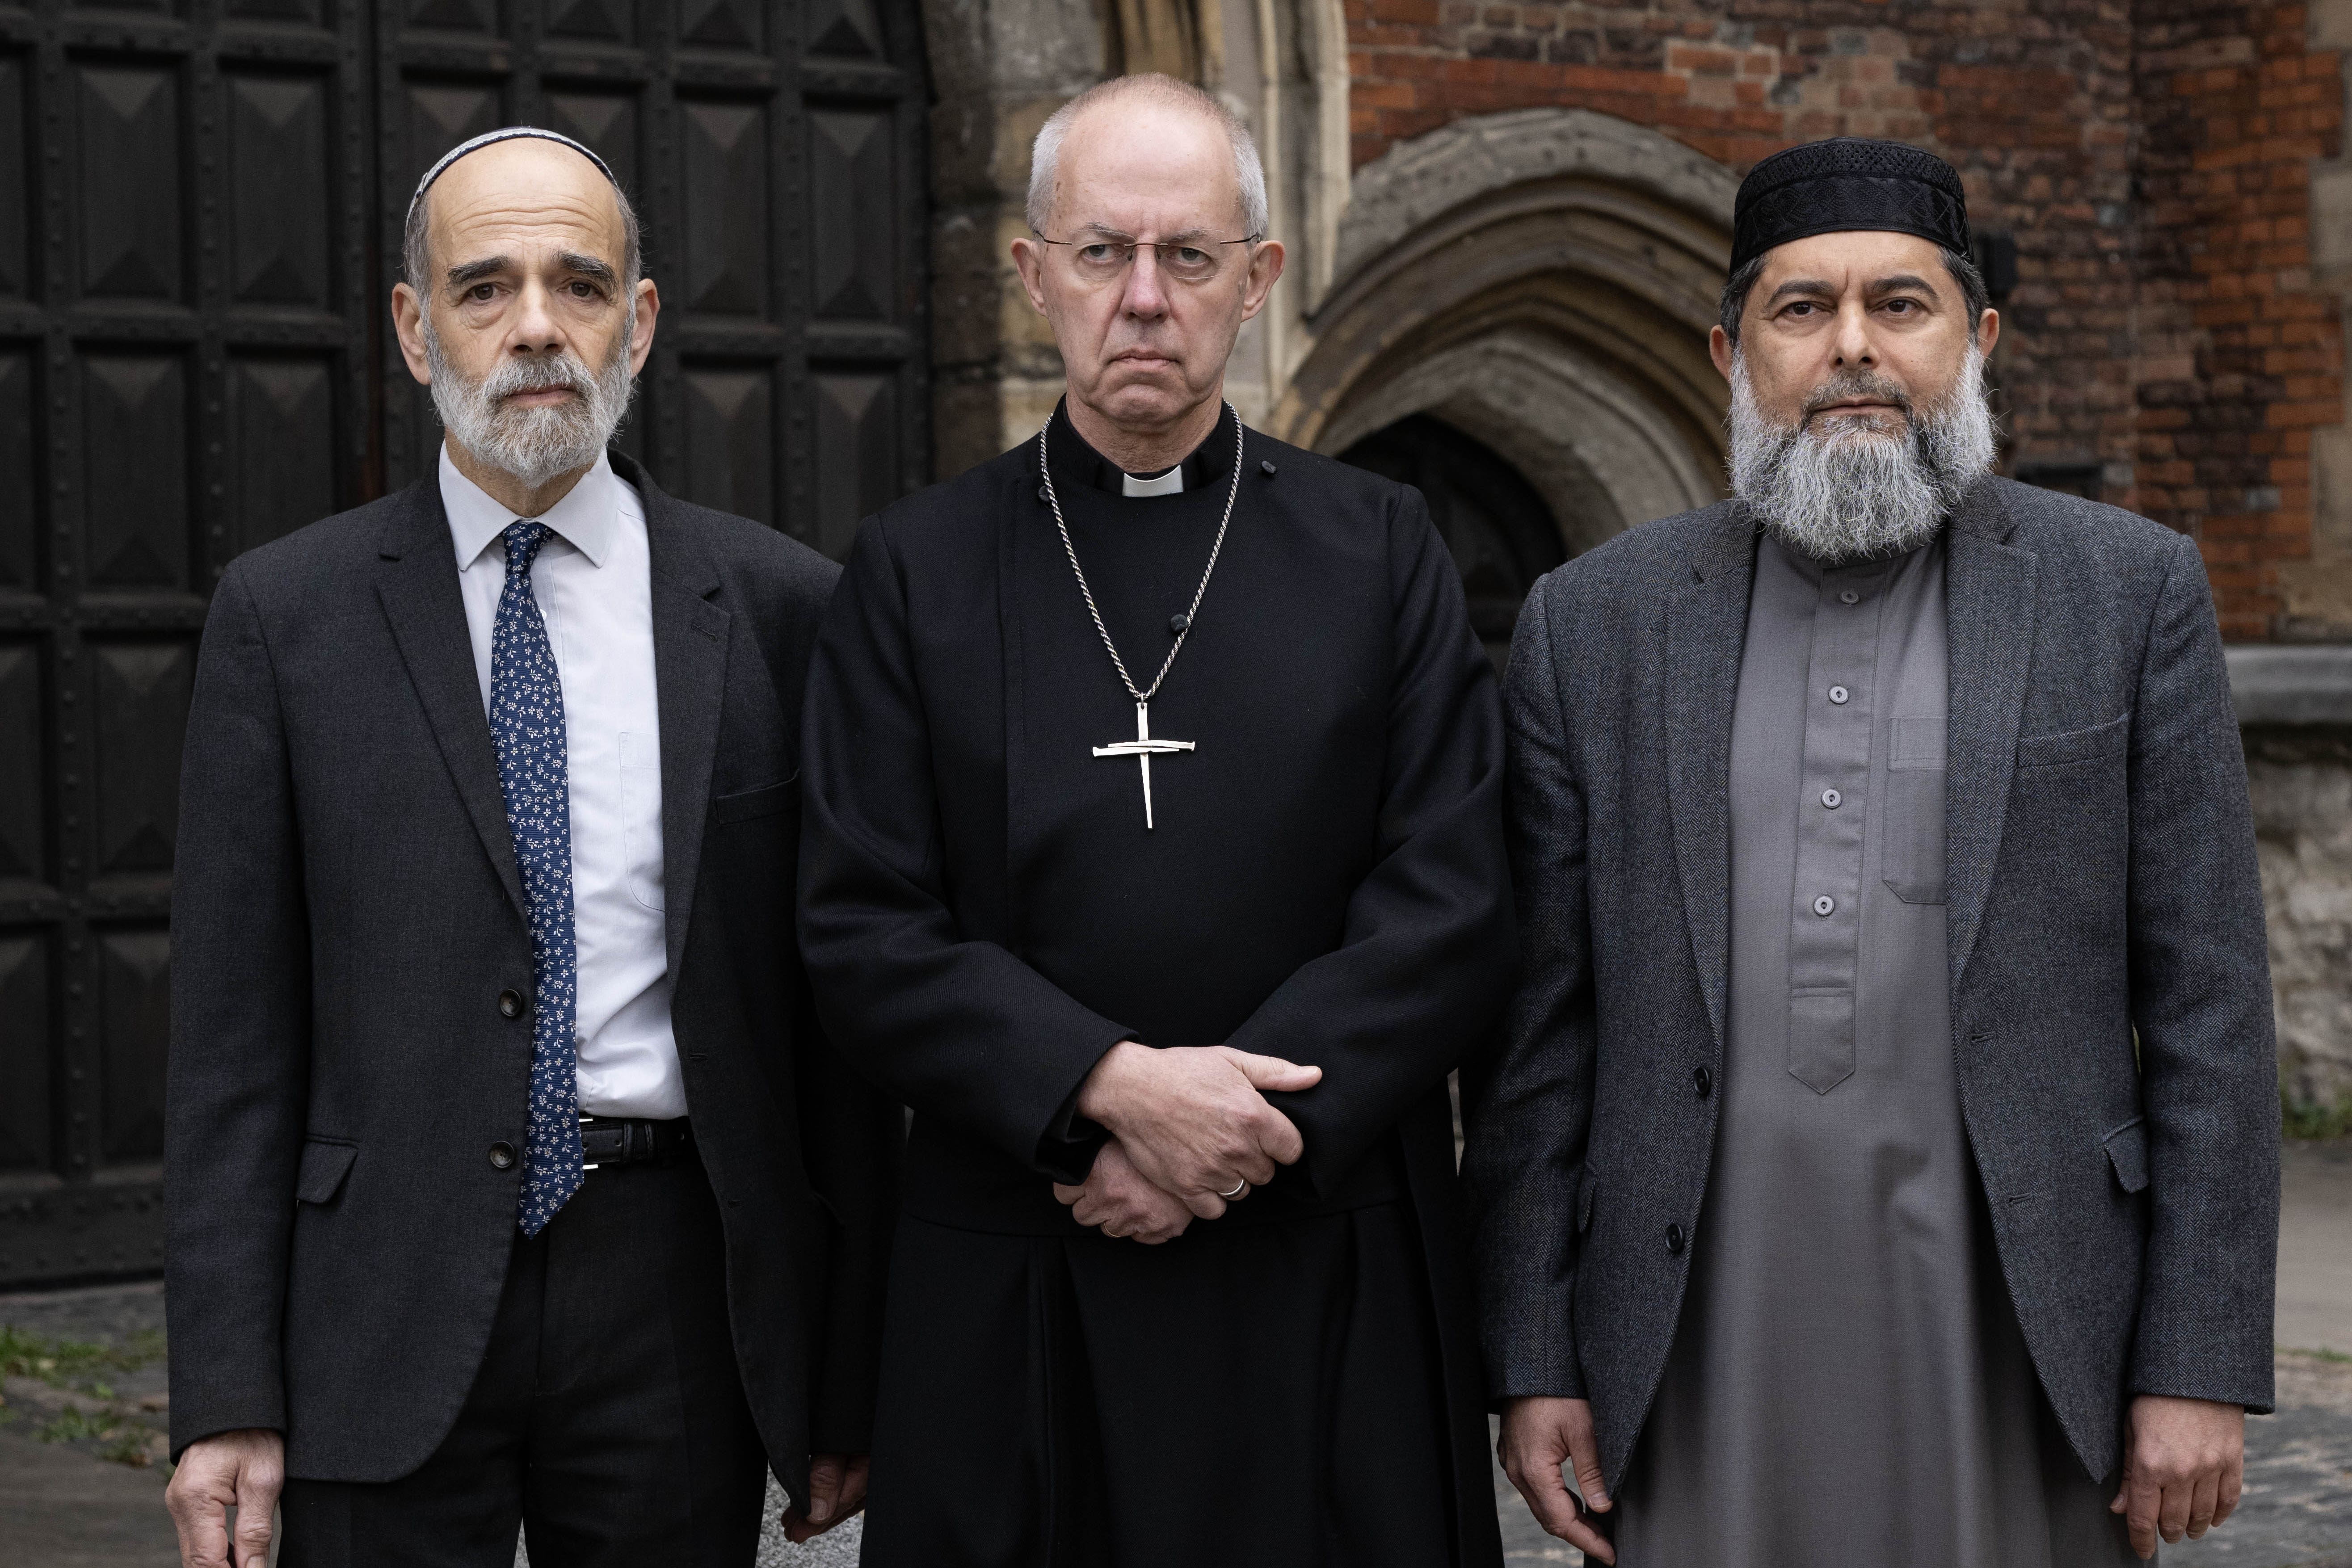 From left: Rabbi Jonathan Wittenberg, Archbishop of Canterbury Justin Welby and Sheikh Ibrahim Mogra make a statement at Lambeth Palace in London (Doug Peters/PA)